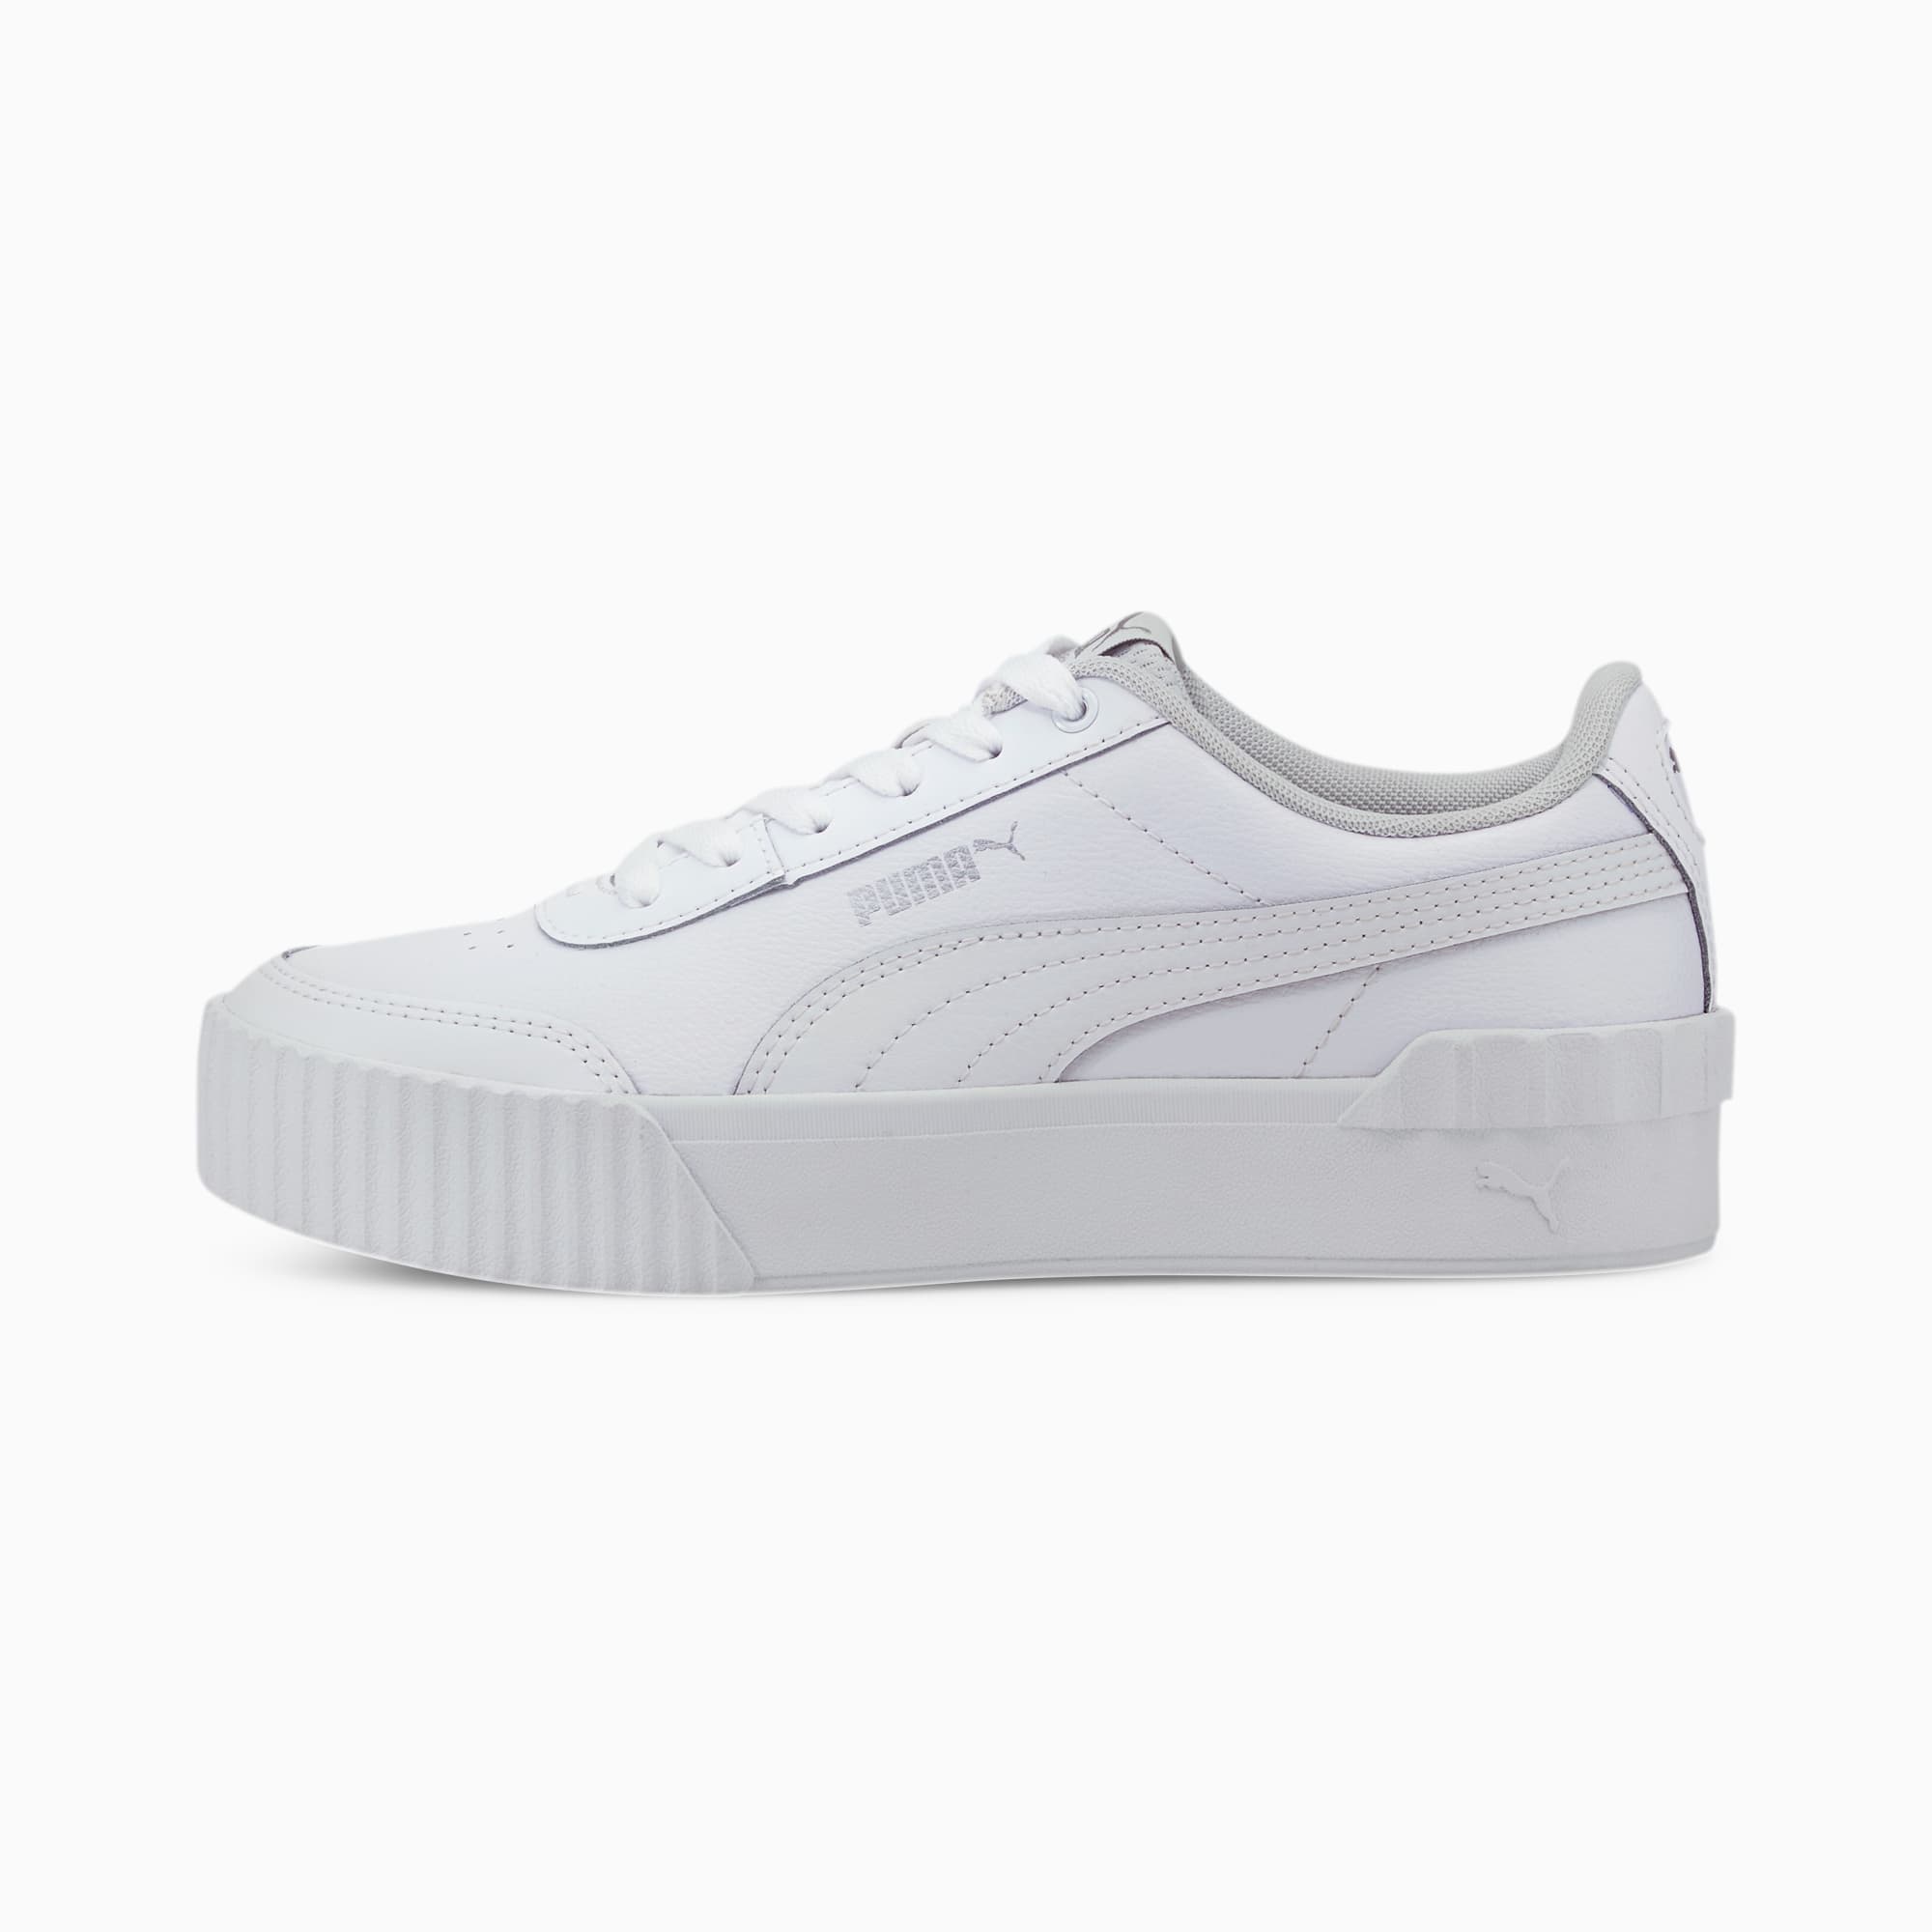 puma sneakers offer